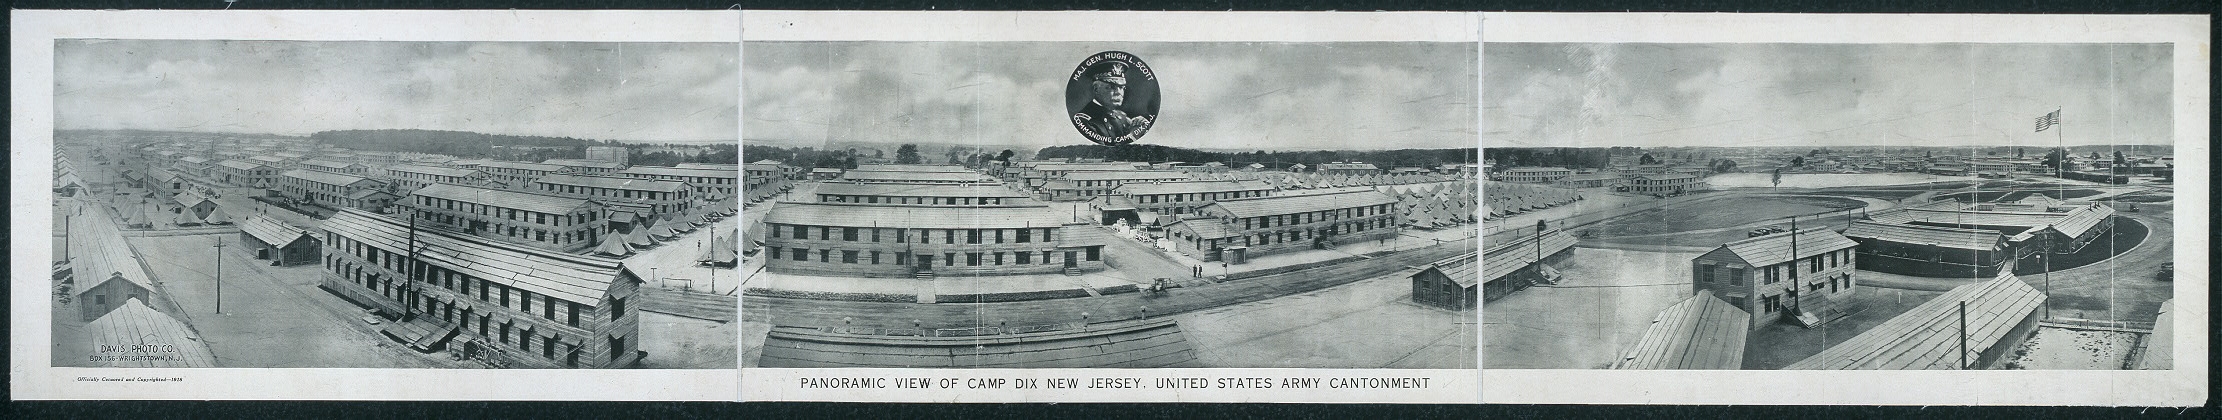 Panoramic view of Camp Dix, New Jersey, United States...